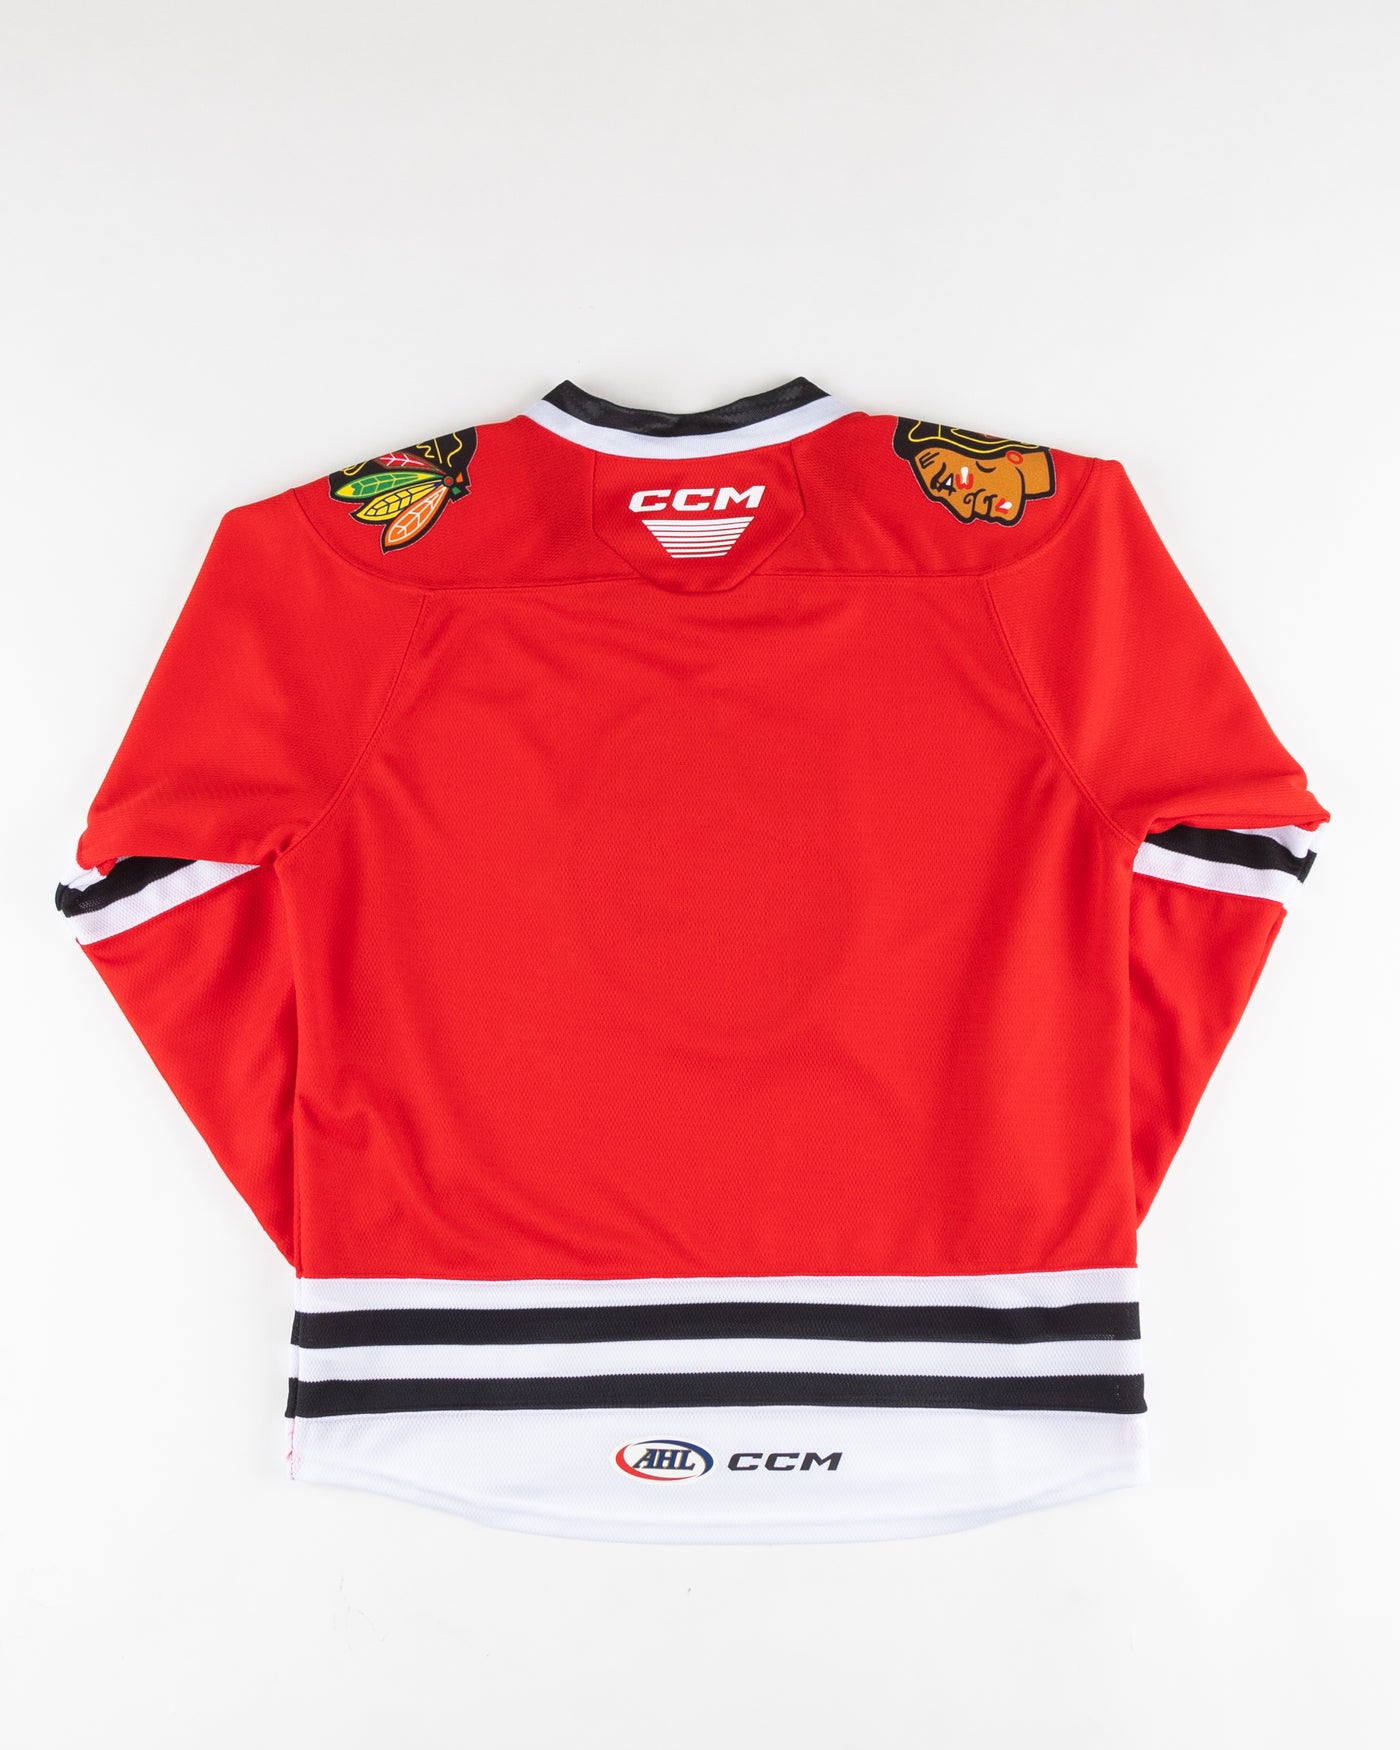 Rockford IceHogs Youth CCM Jersey